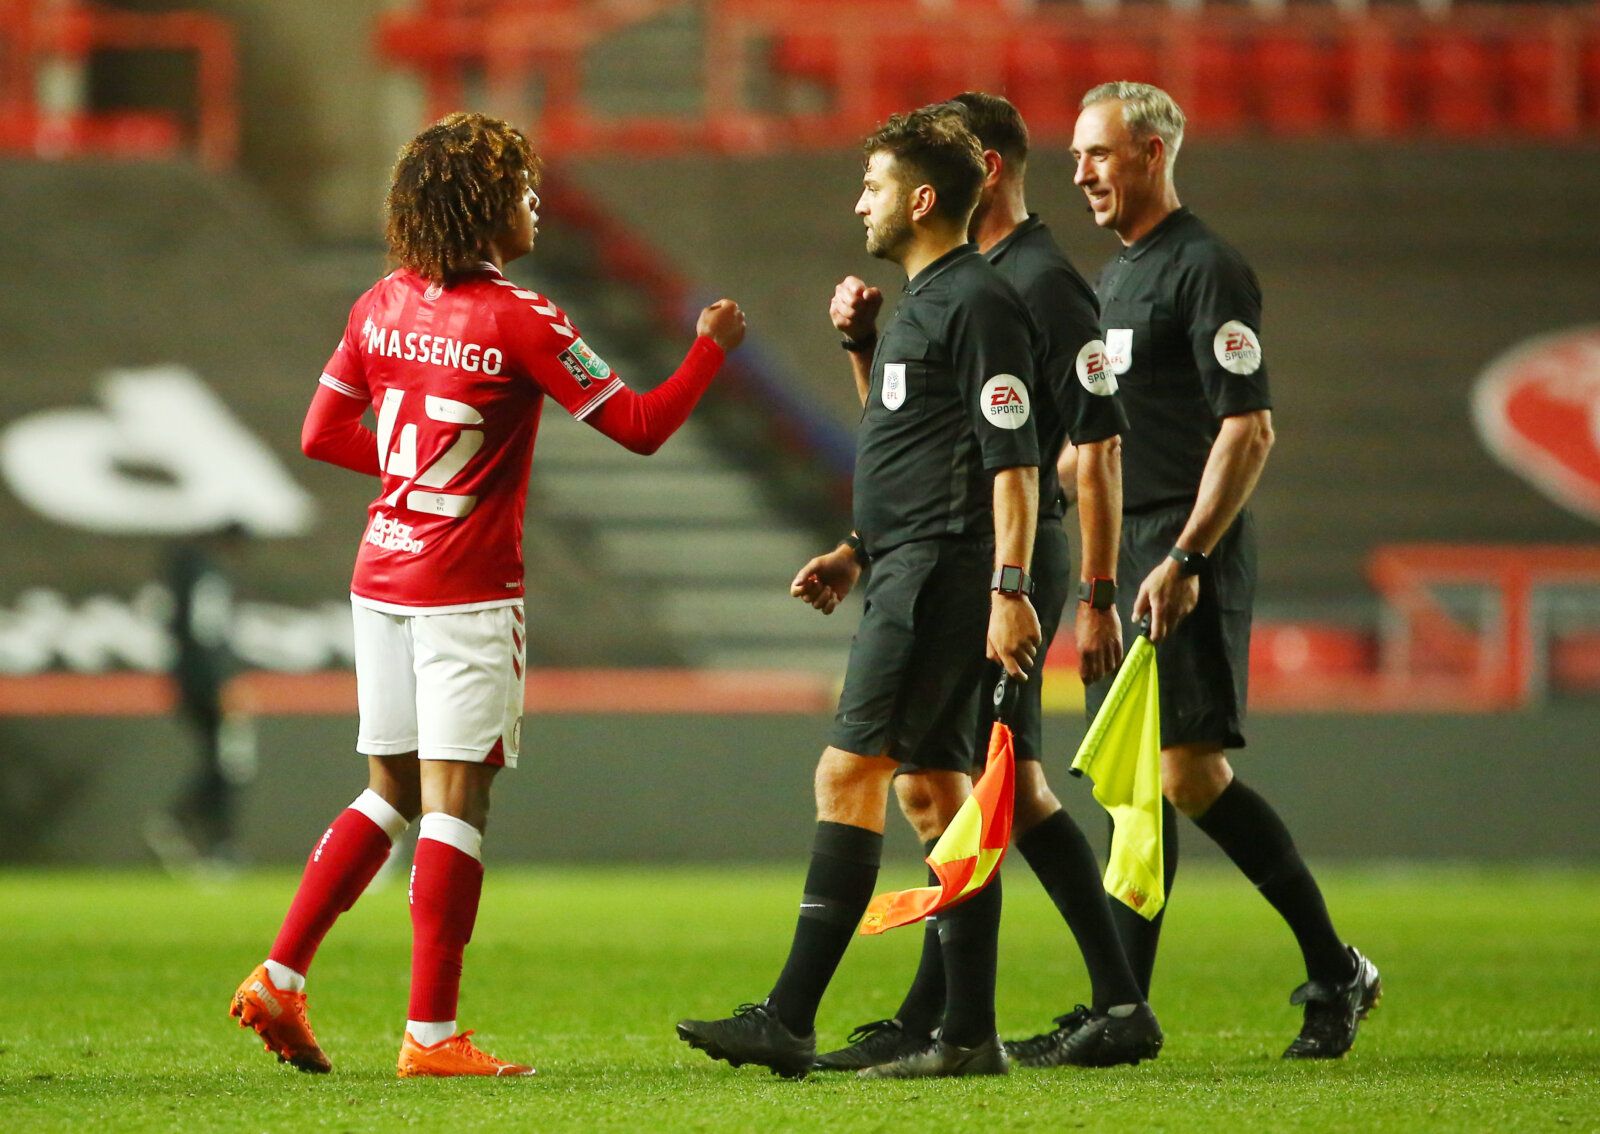 Soccer Football - Carabao Cup Third Round - Bristol City v Aston Villa - Ashton Gate Stadium, Bristol, Britain - September 24, 2020 Bristol City's Han-Noah Massengo at the end of the match Pool via REUTERS/Geoff Caddick EDITORIAL USE ONLY. No use with unauthorized audio, video, data, fixture lists, club/league logos or 'live' services. Online in-match use limited to 75 images, no video emulation. No use in betting, games or single club/league/player publications.  Please contact your account rep